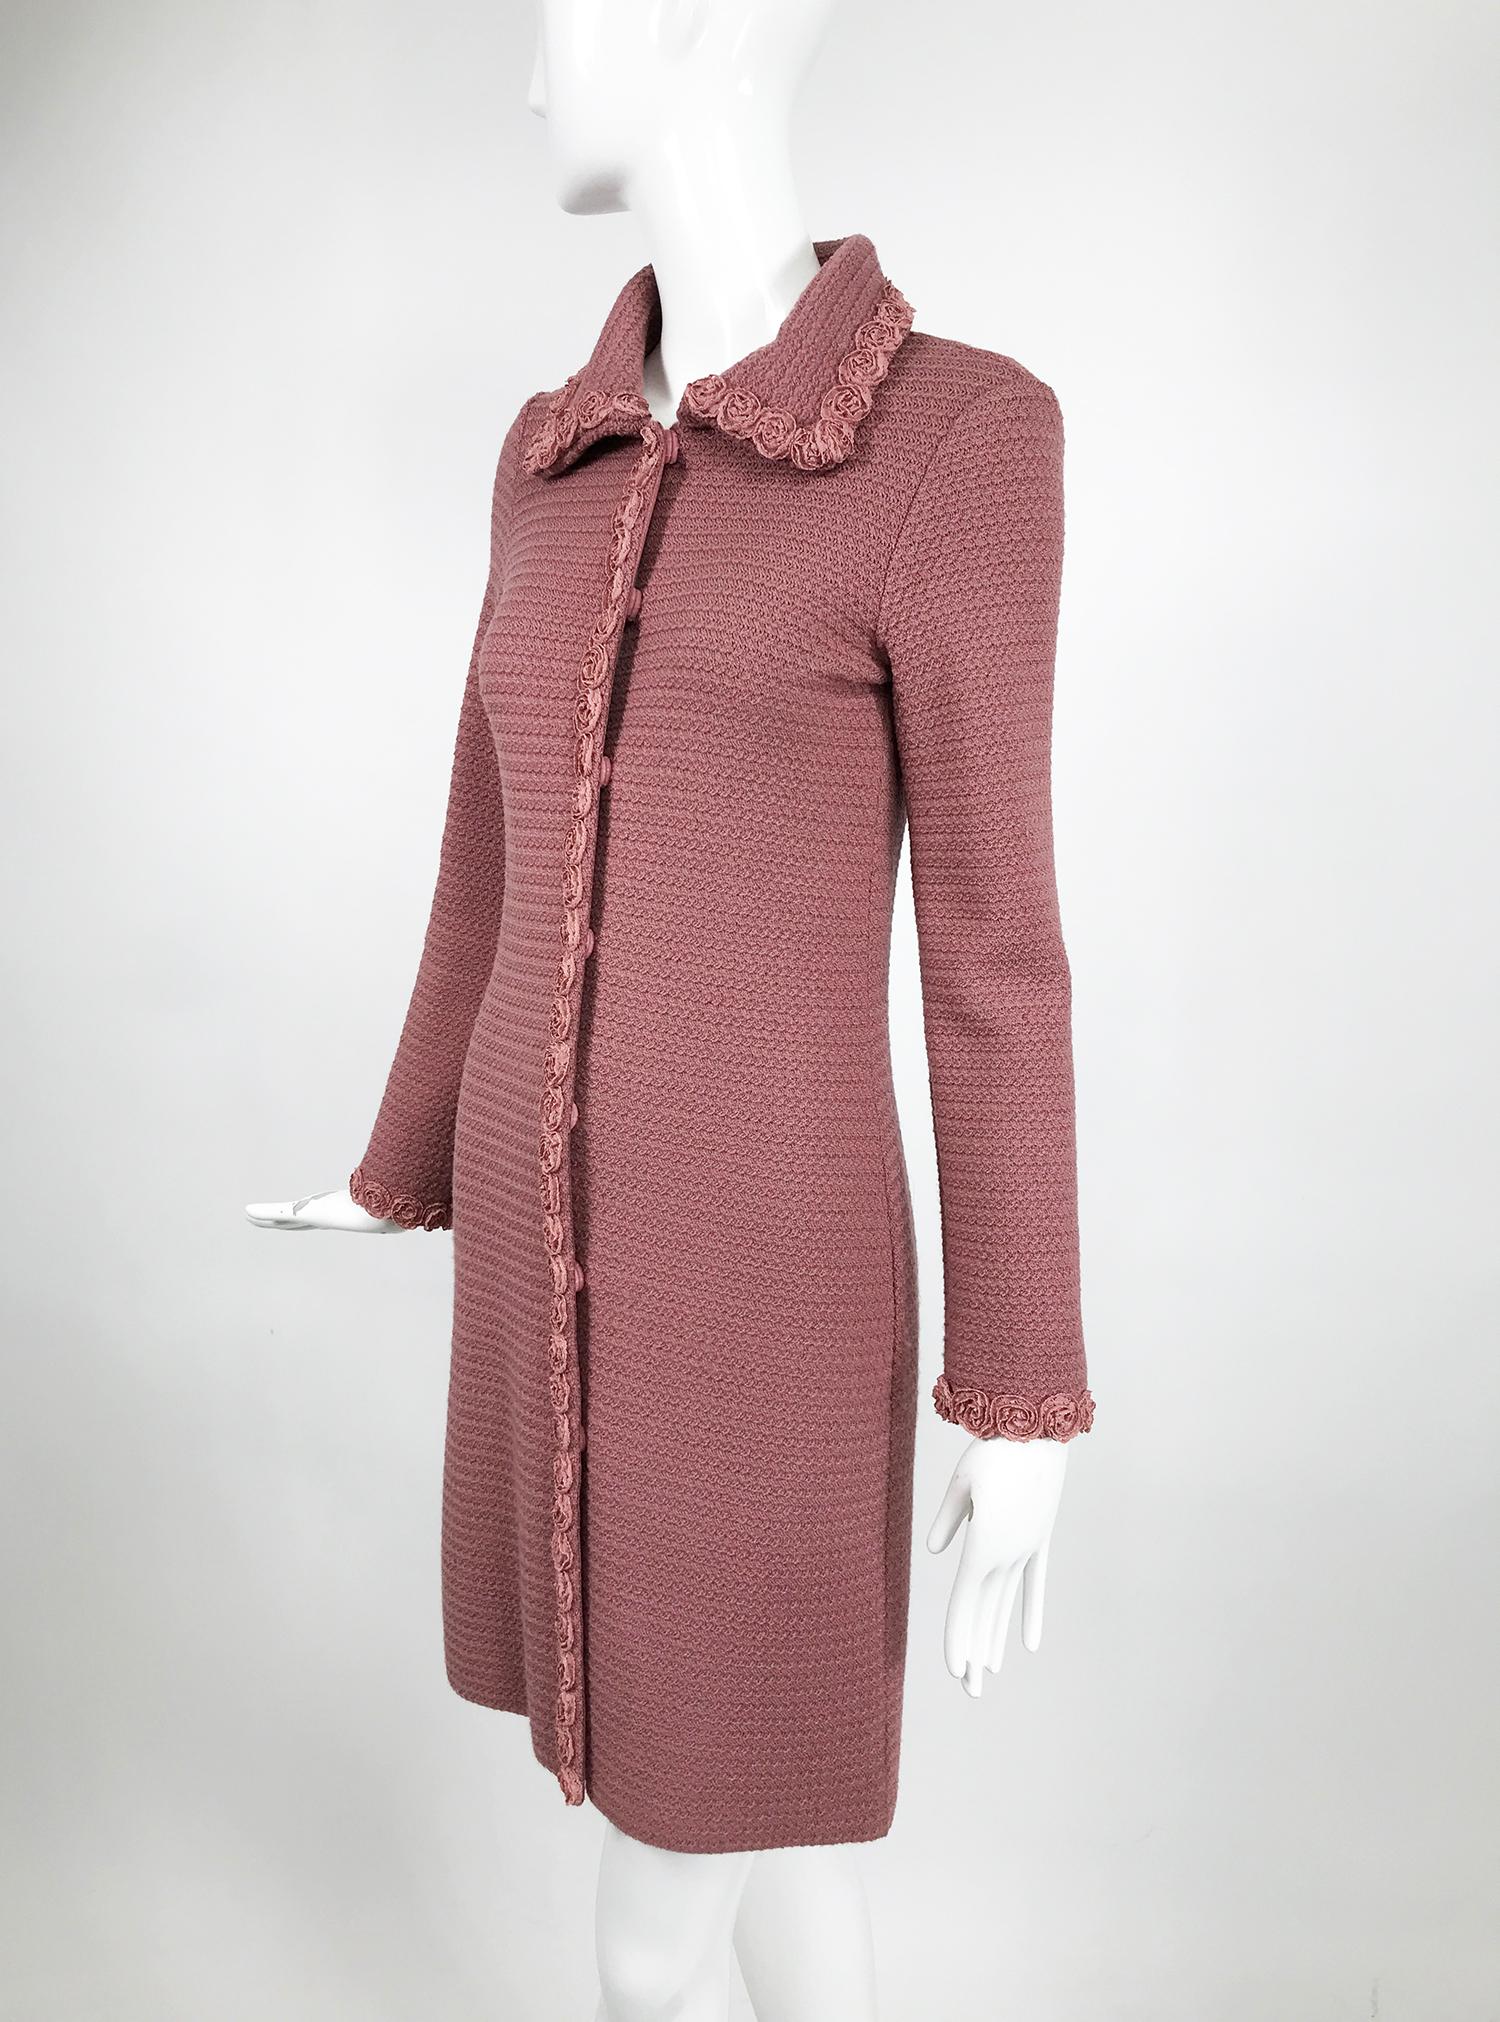 Moschino Pink Wool Knit Coat with Rosette Lace Trims 4